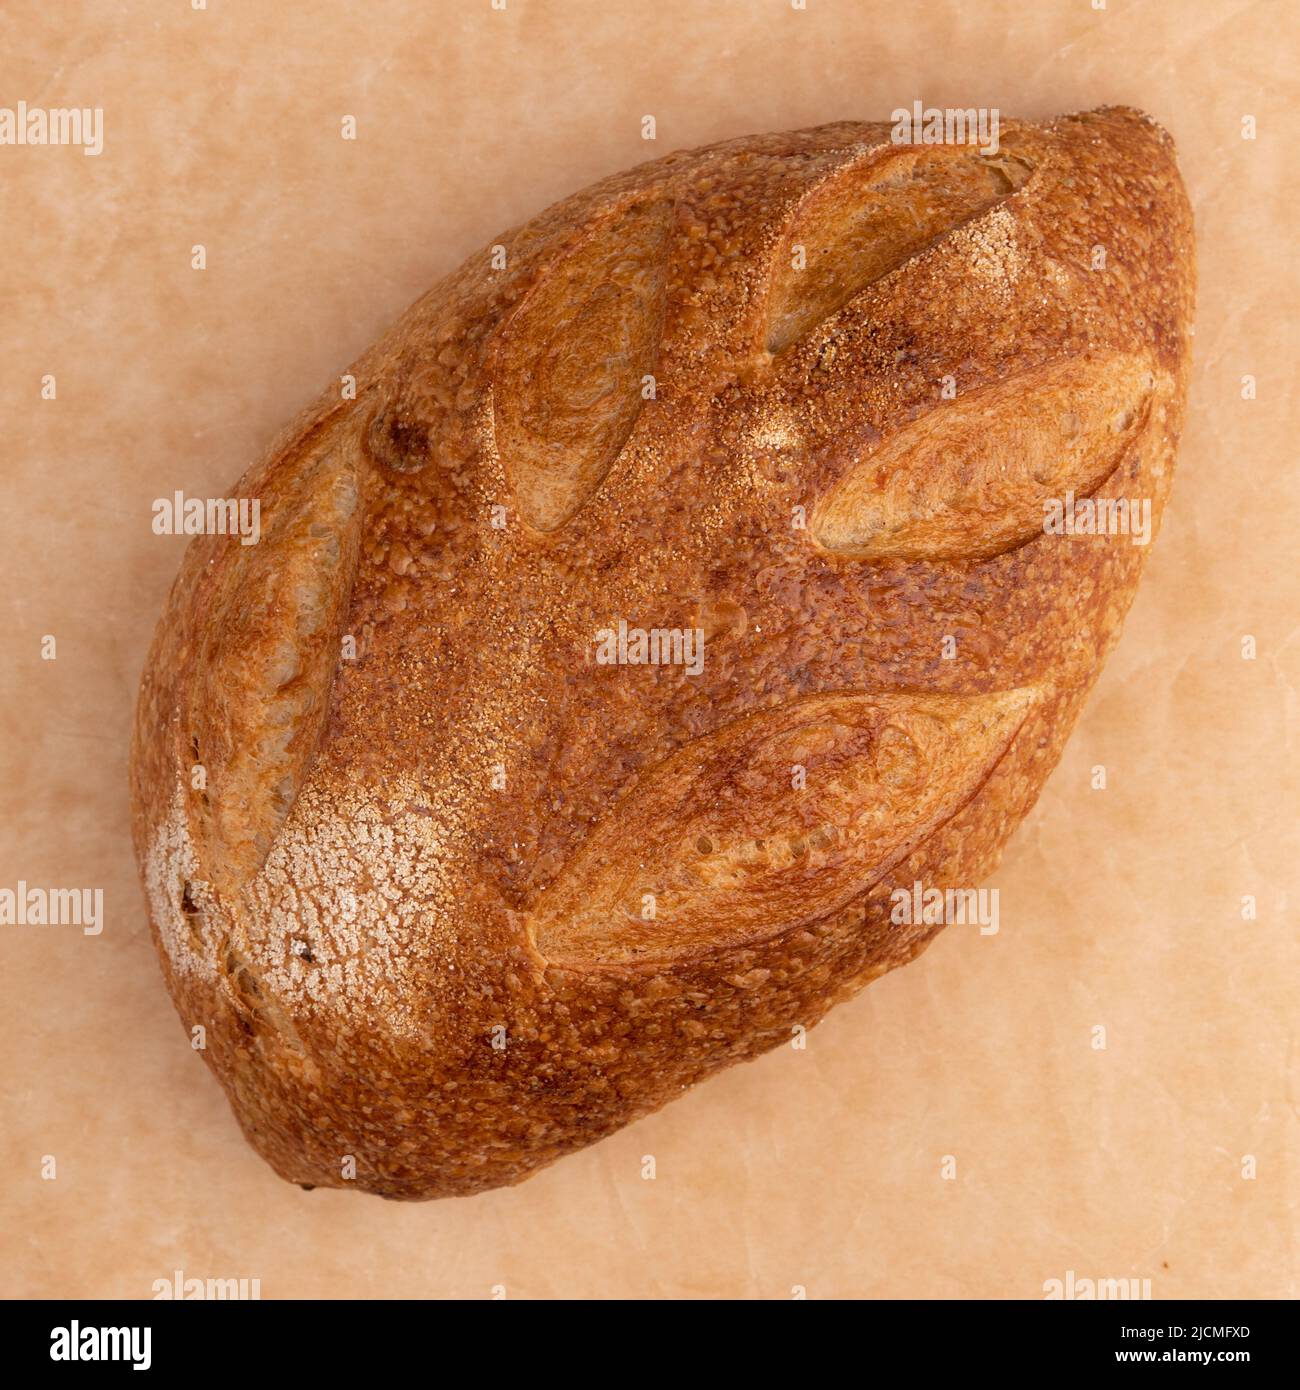 top view of fresh homemade bread with golden crispy crust on parchment background, organic loaf with tomato close-up, italian food Stock Photo